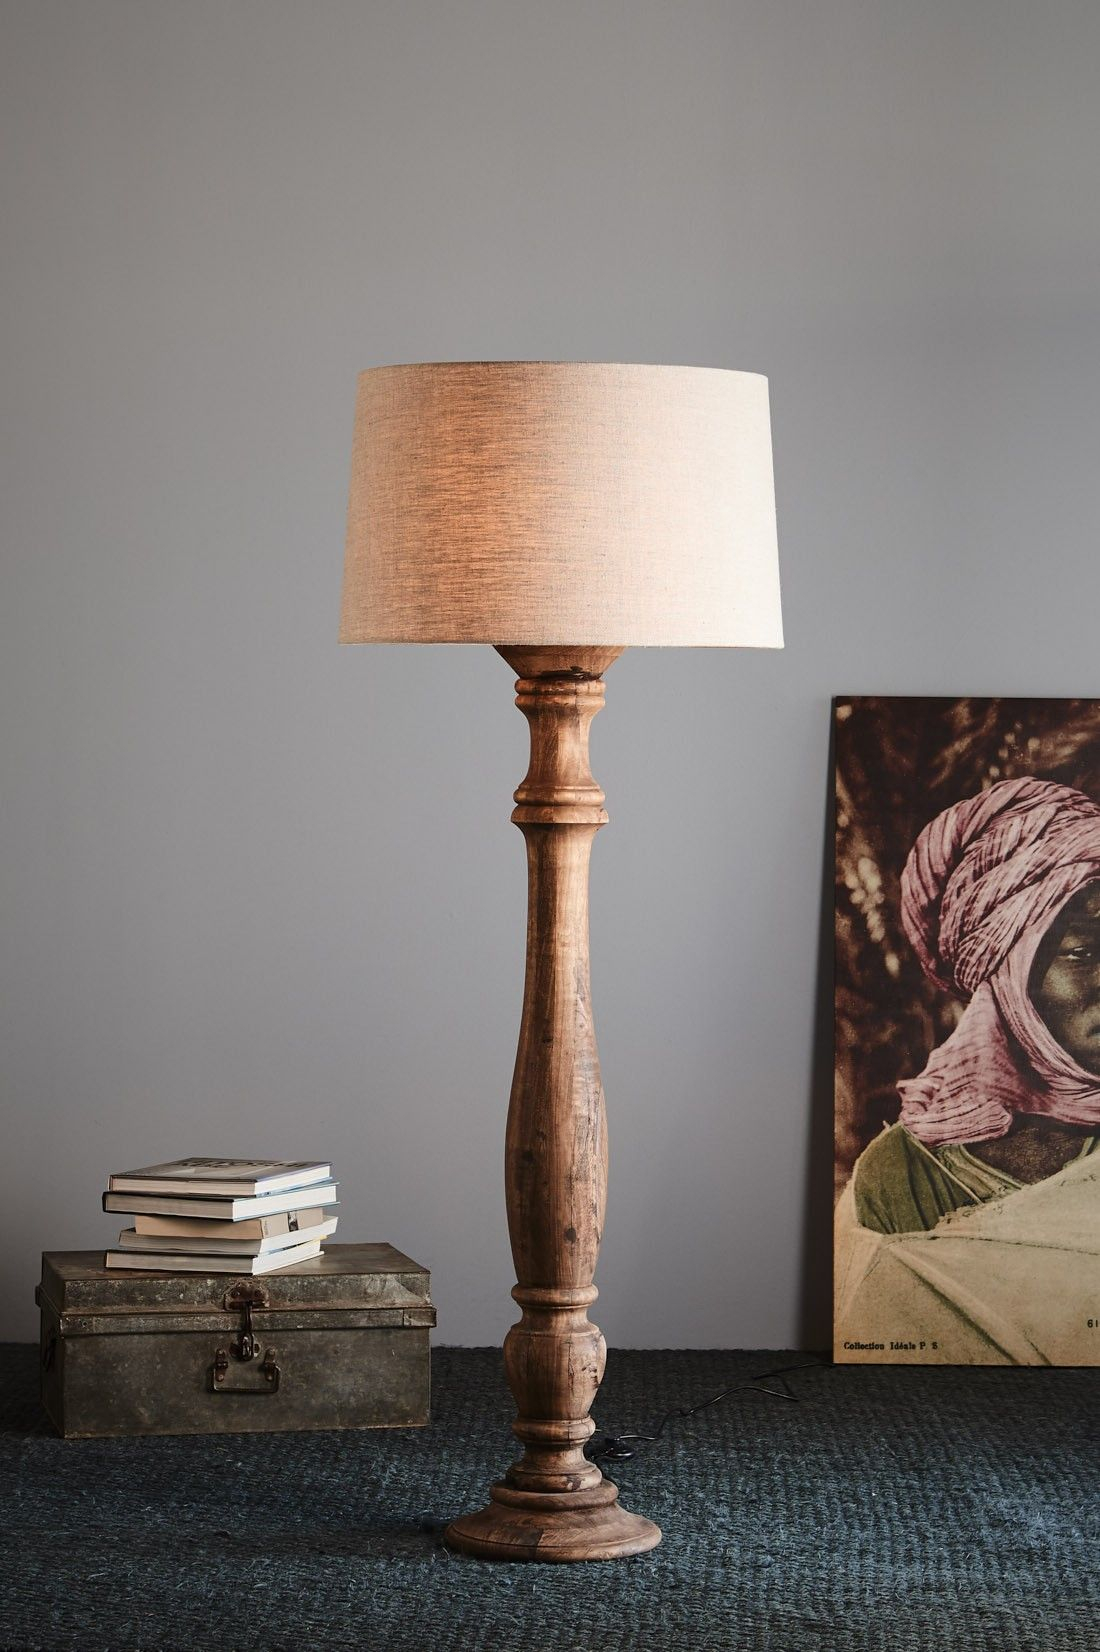 An Elegant Candlestick Style Turned Wood Floor Lamp In A regarding size 1100 X 1652